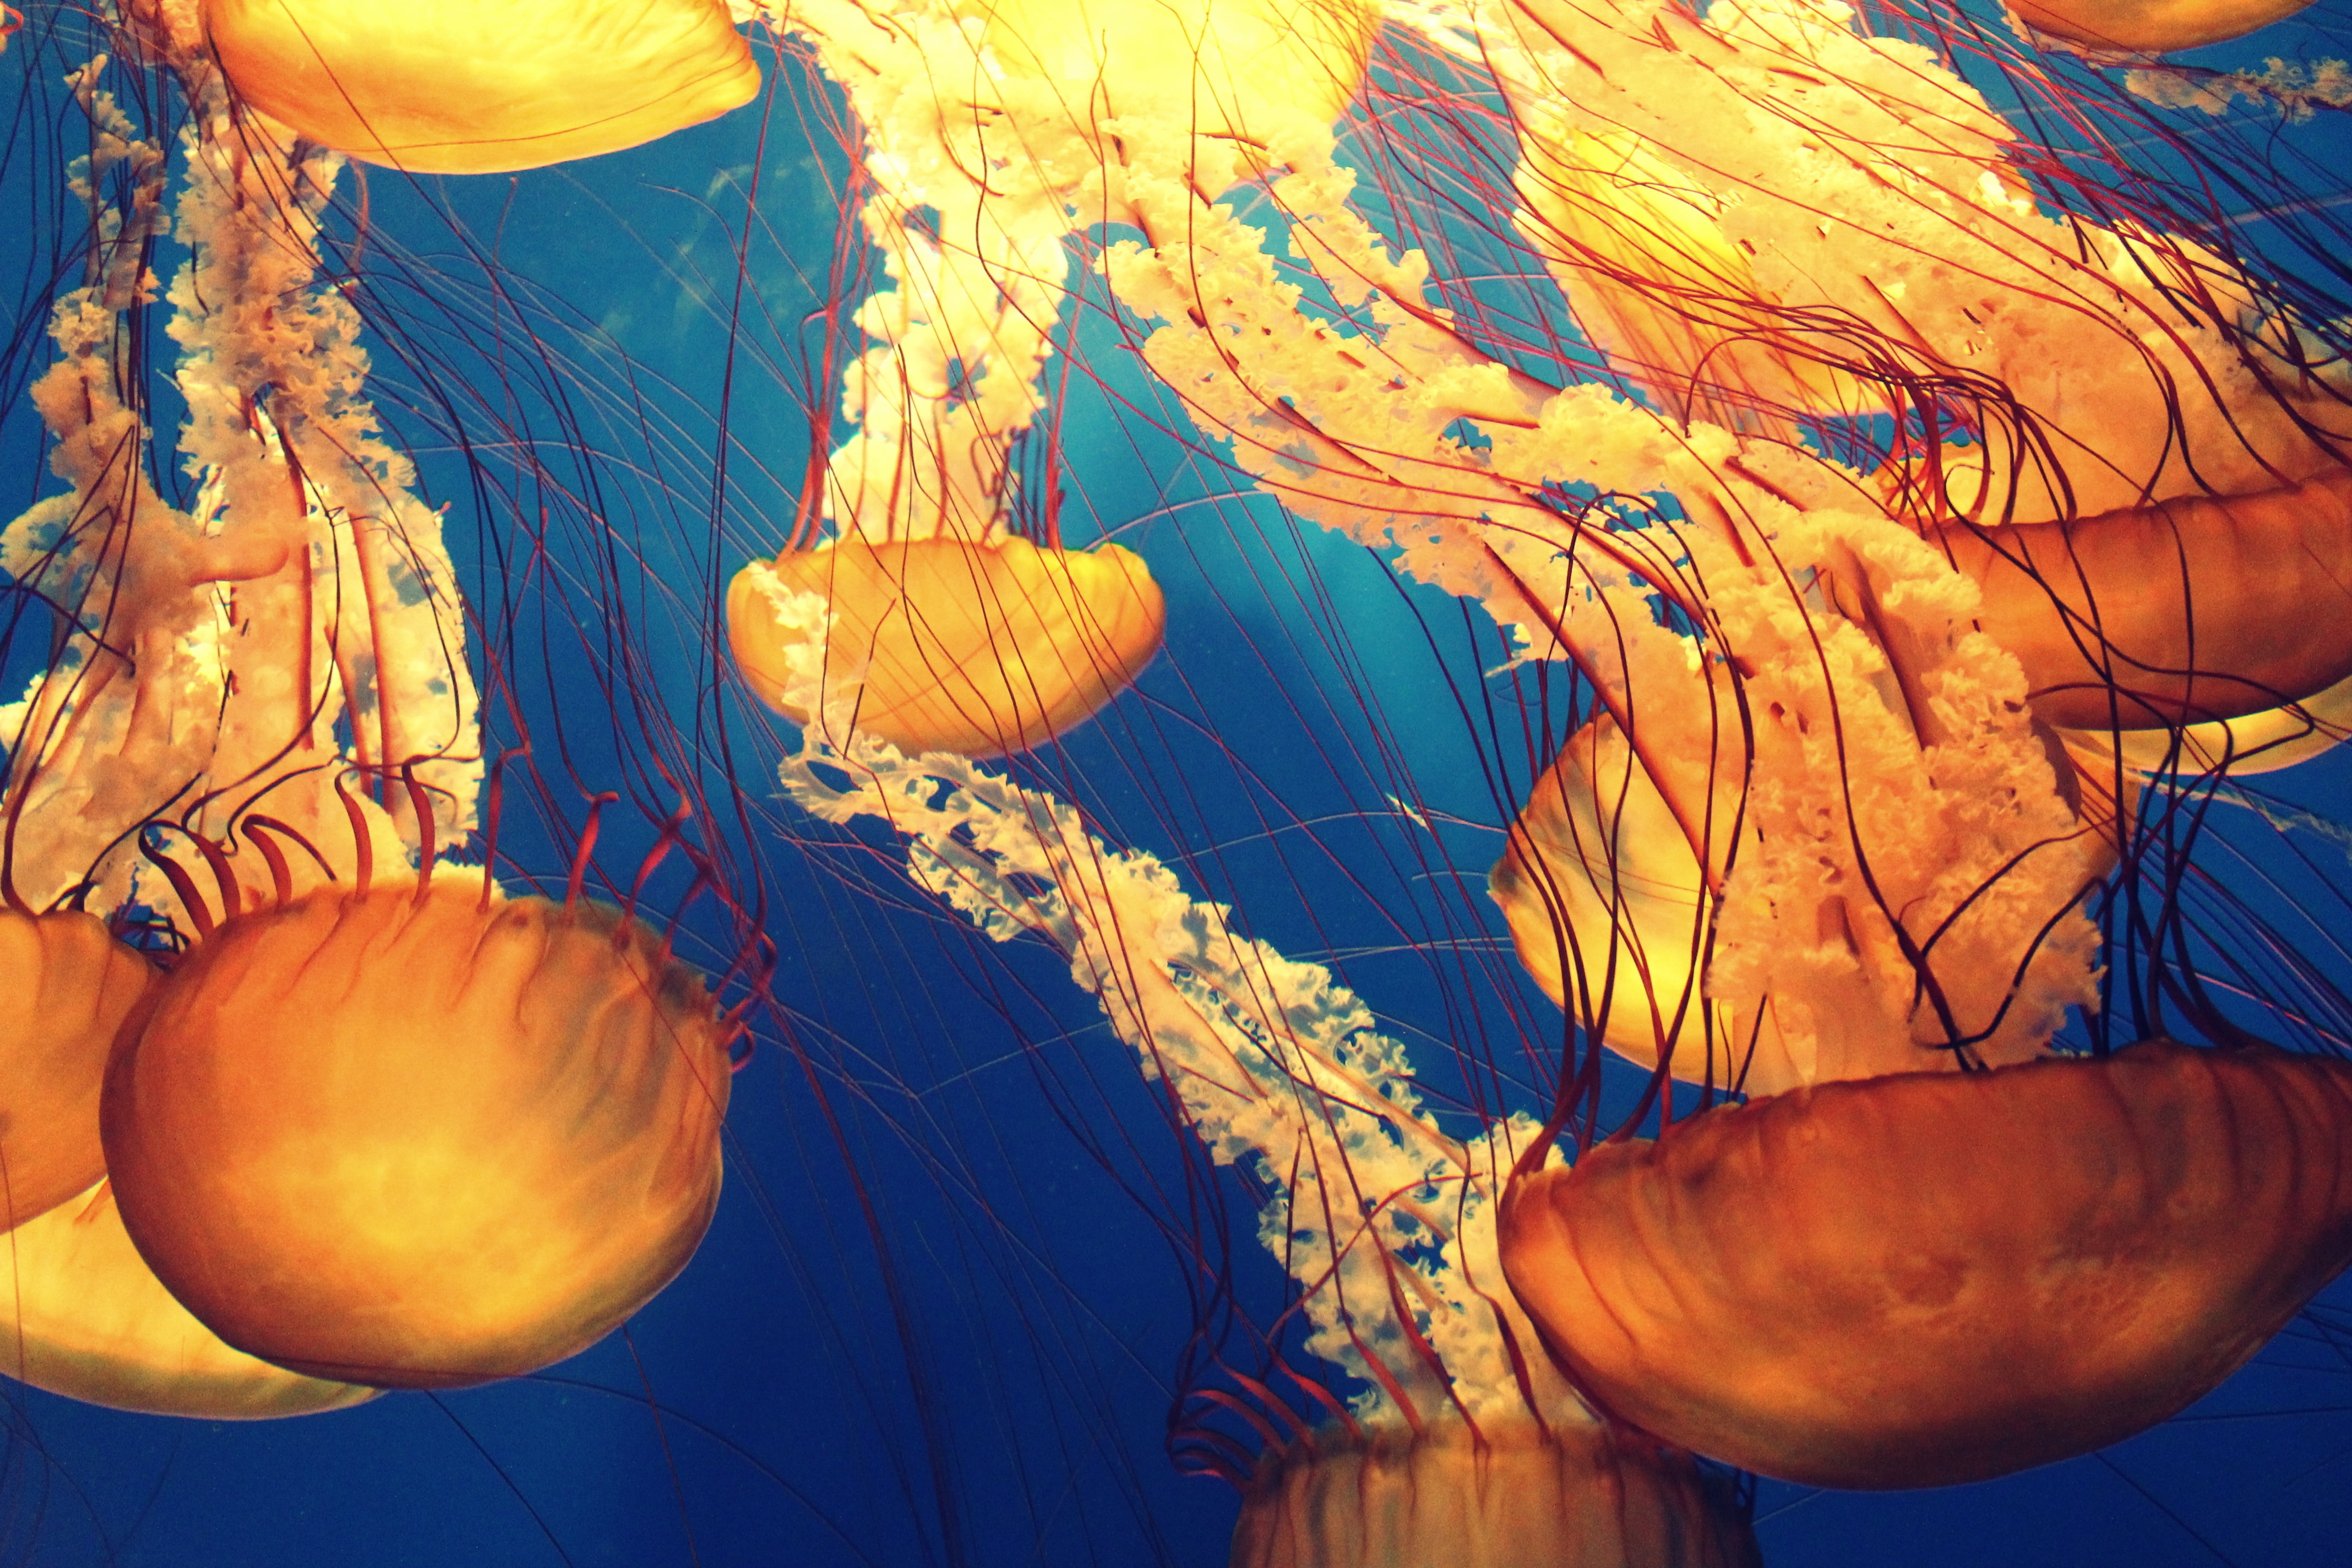 jelly fishes